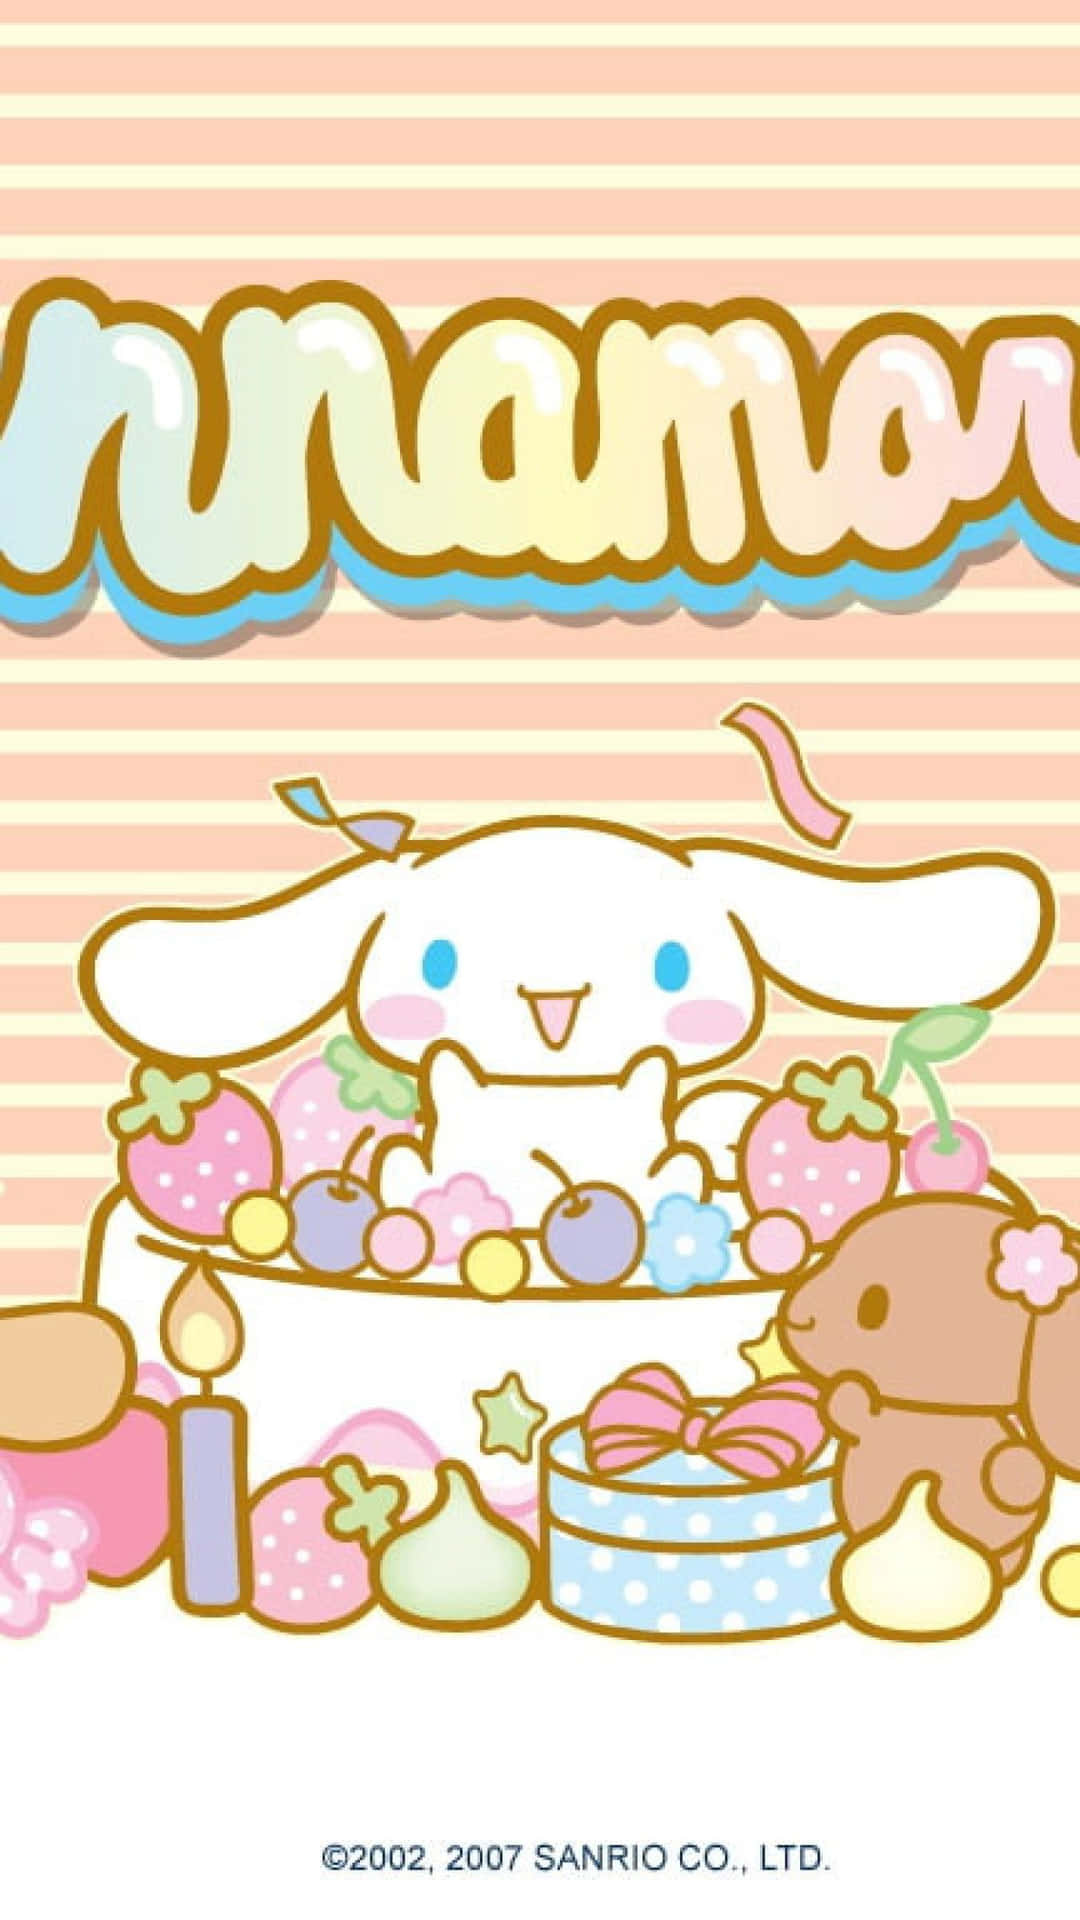 A Cute Bunny With A Cake And Some Sweets Wallpaper